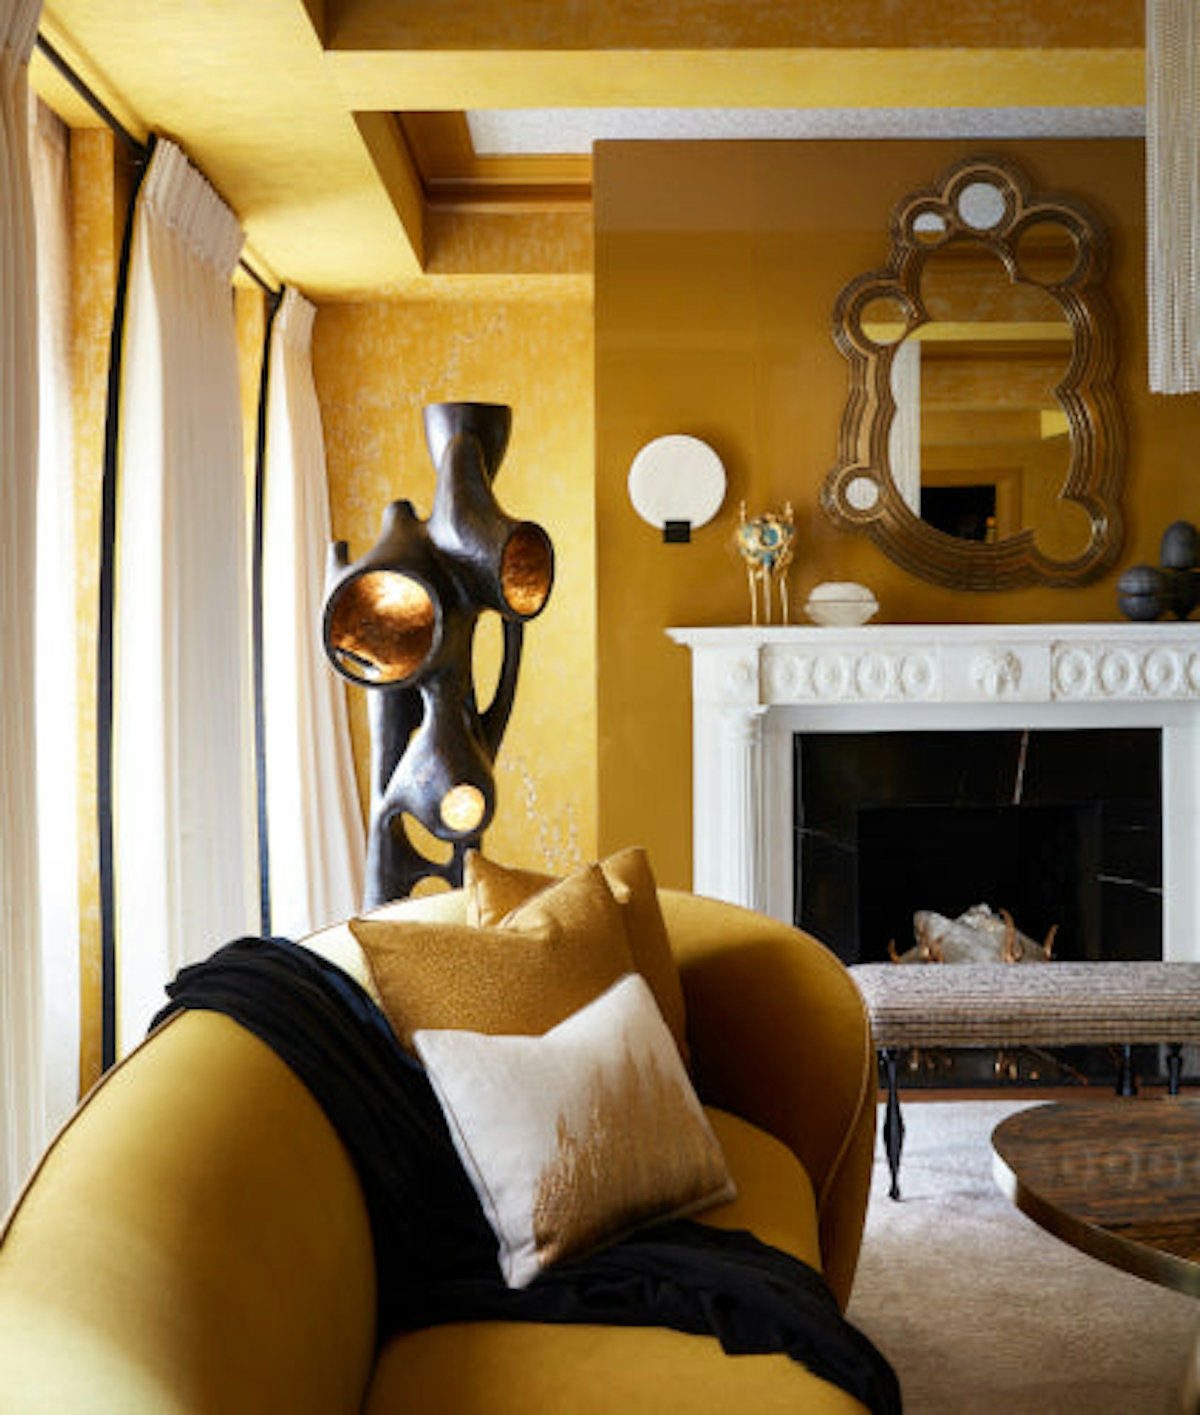 Summer Interior Design Trends for 2019 - Golden Yellow Colour Tones - Drake Anderson - LuxDeco Style Guide